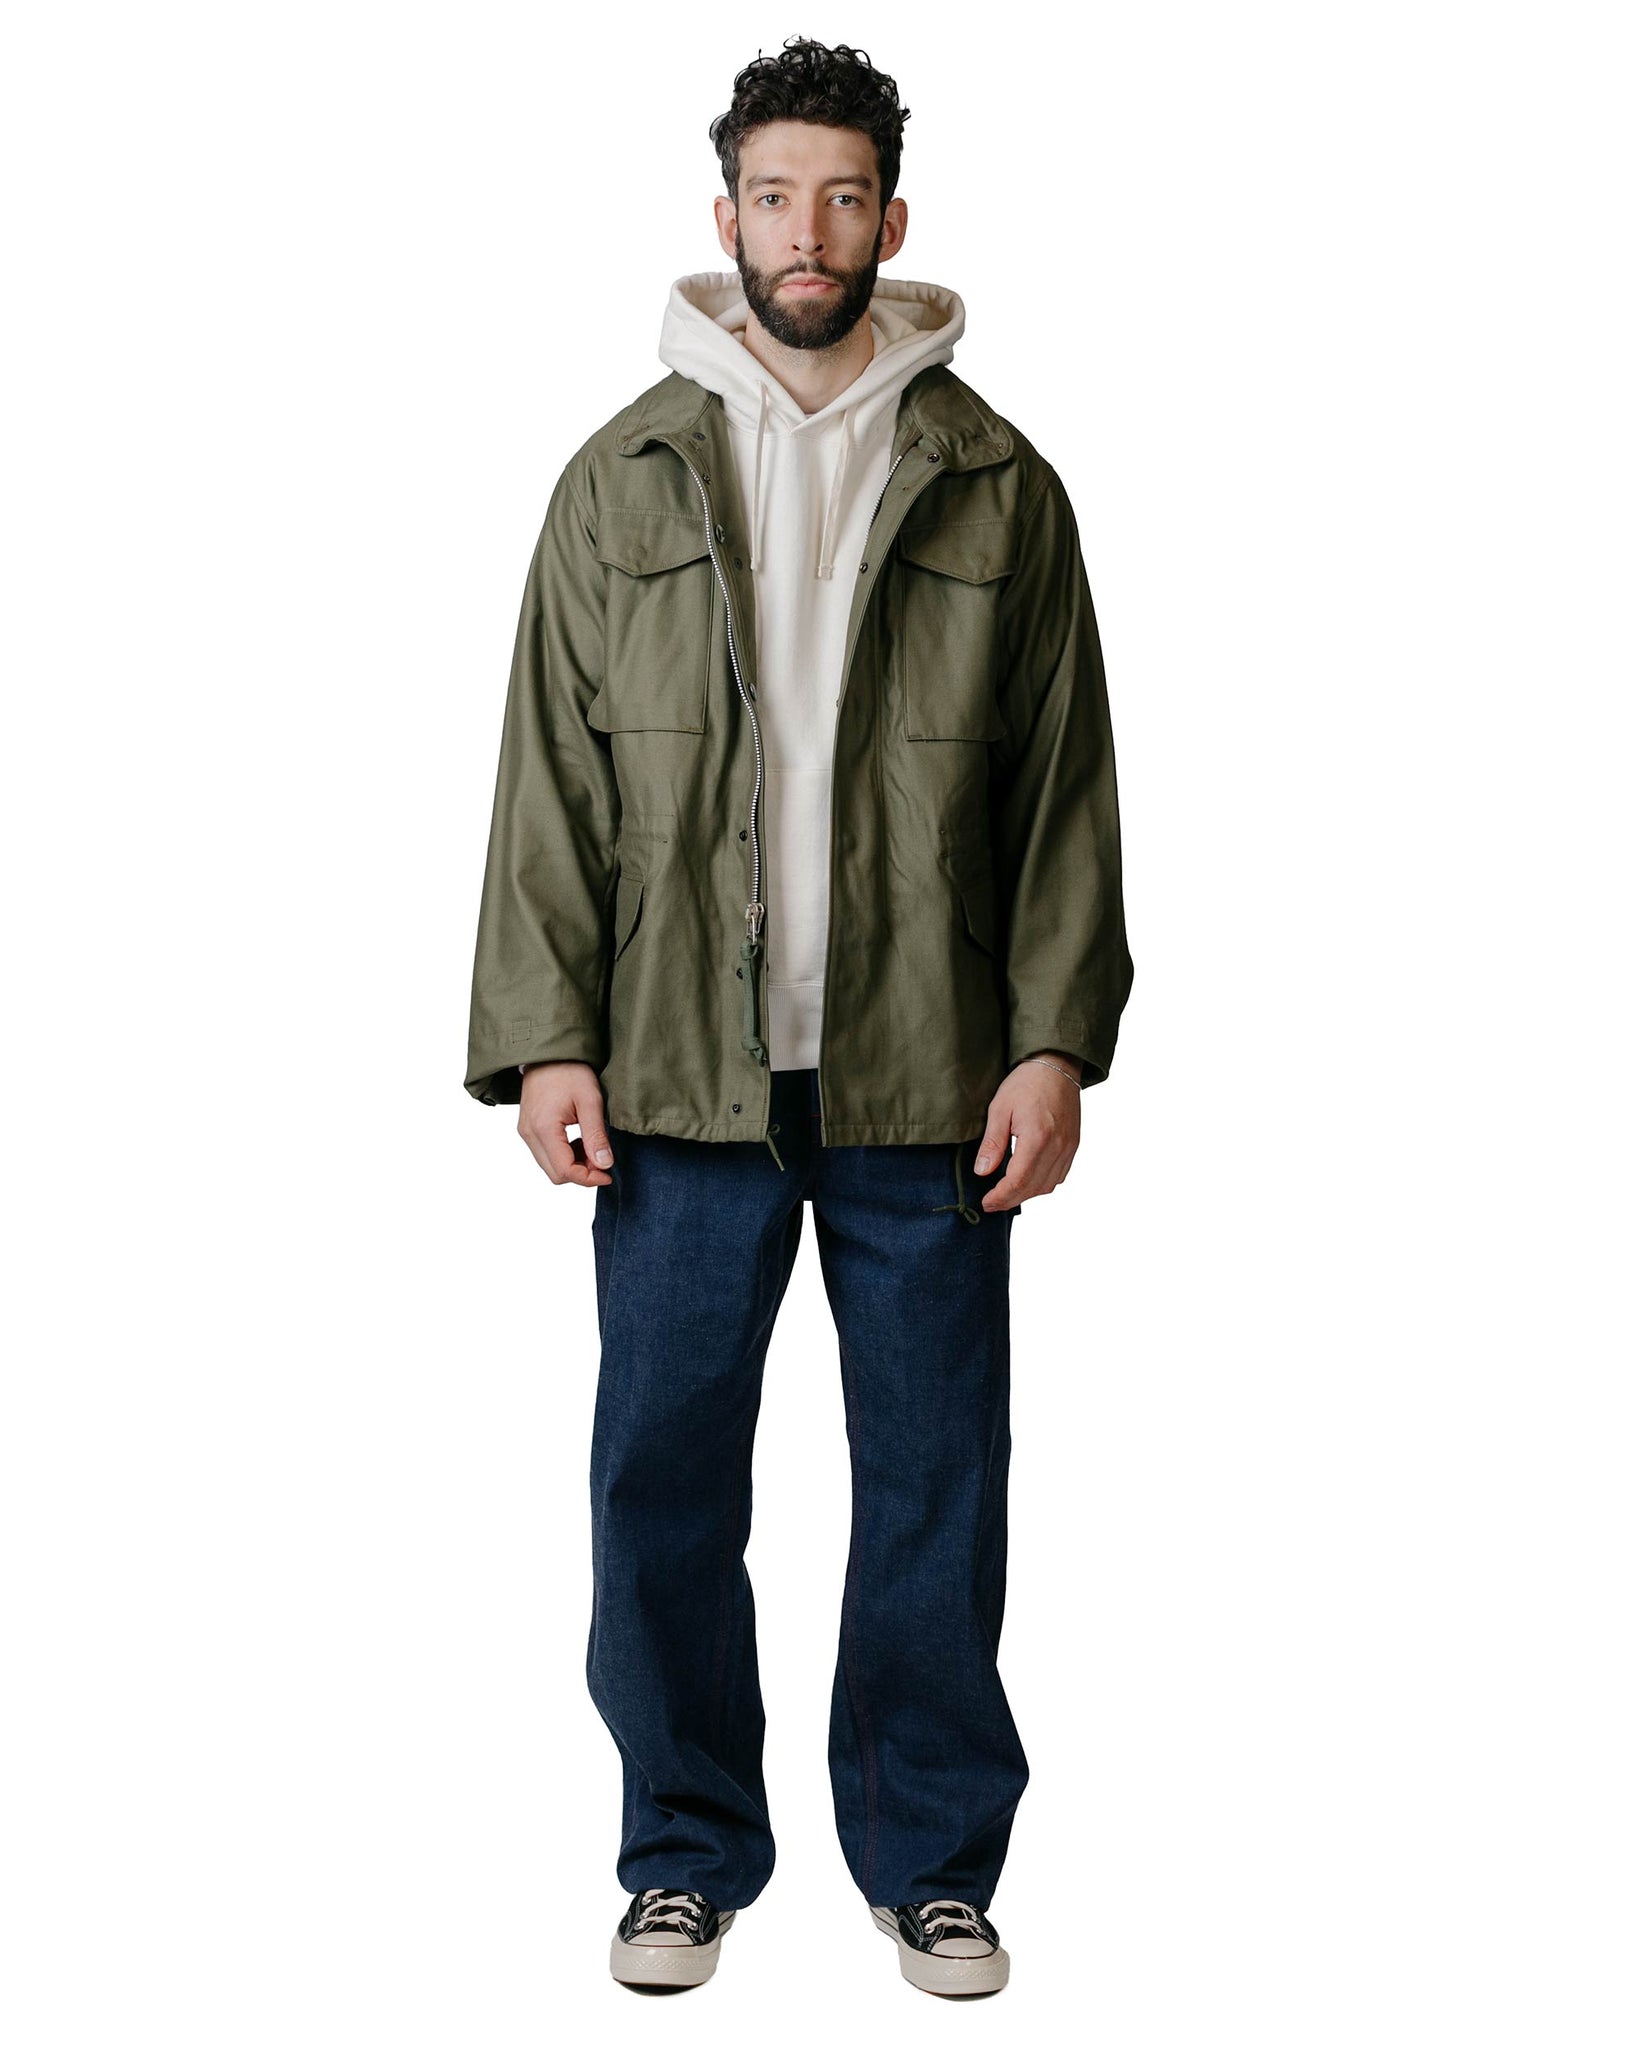 The Real McCoy's MJ23005 Coat, Man's, Field, M-65 / Early Model Olive